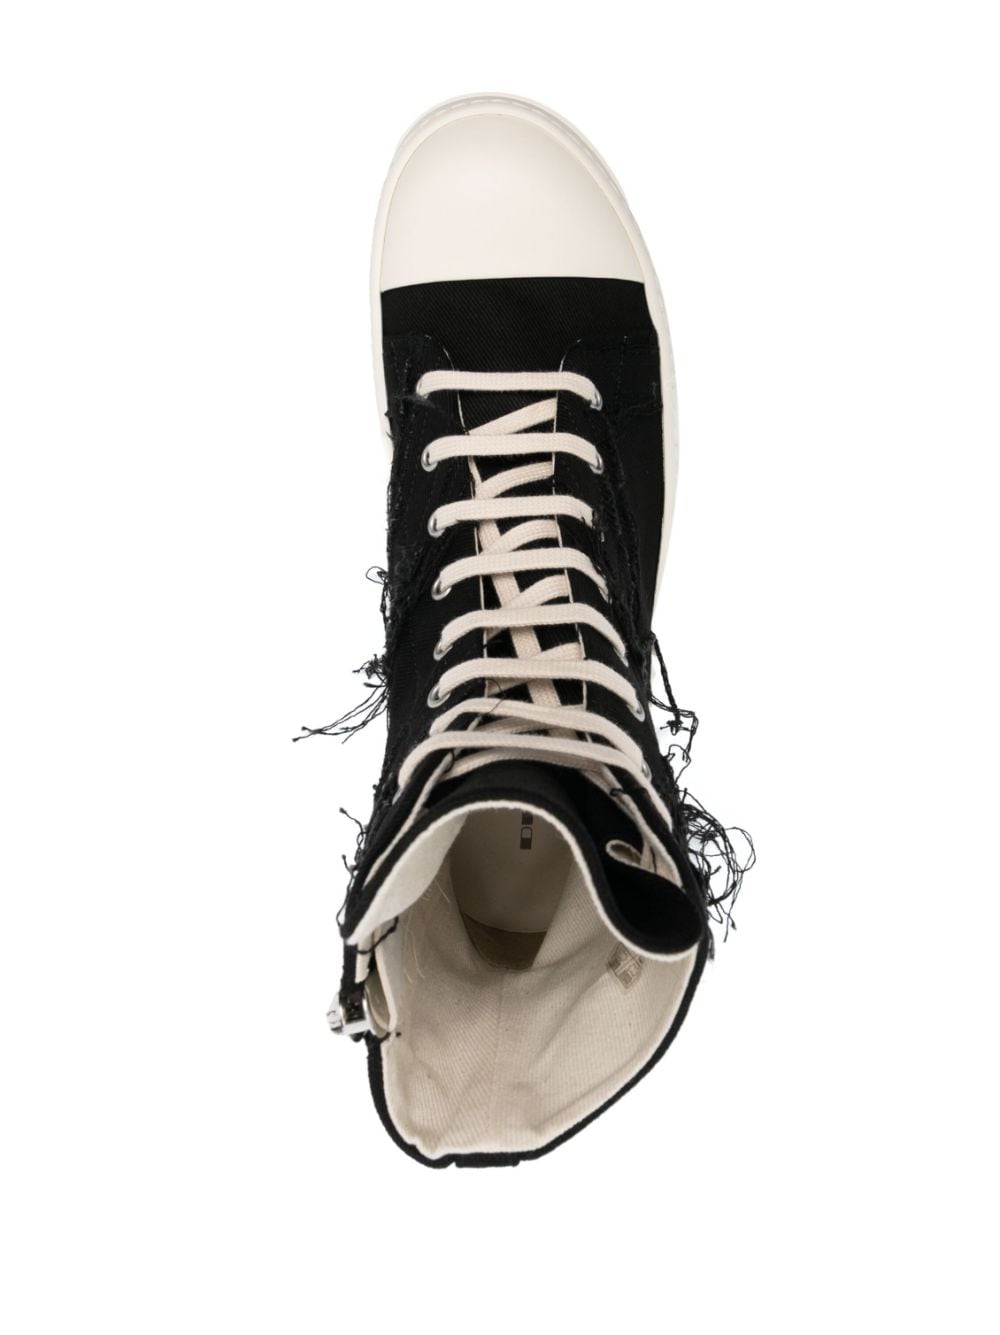 Rick Owens DRKSHDW distressed-effect lace-up high-top Sneakers - Farfetch